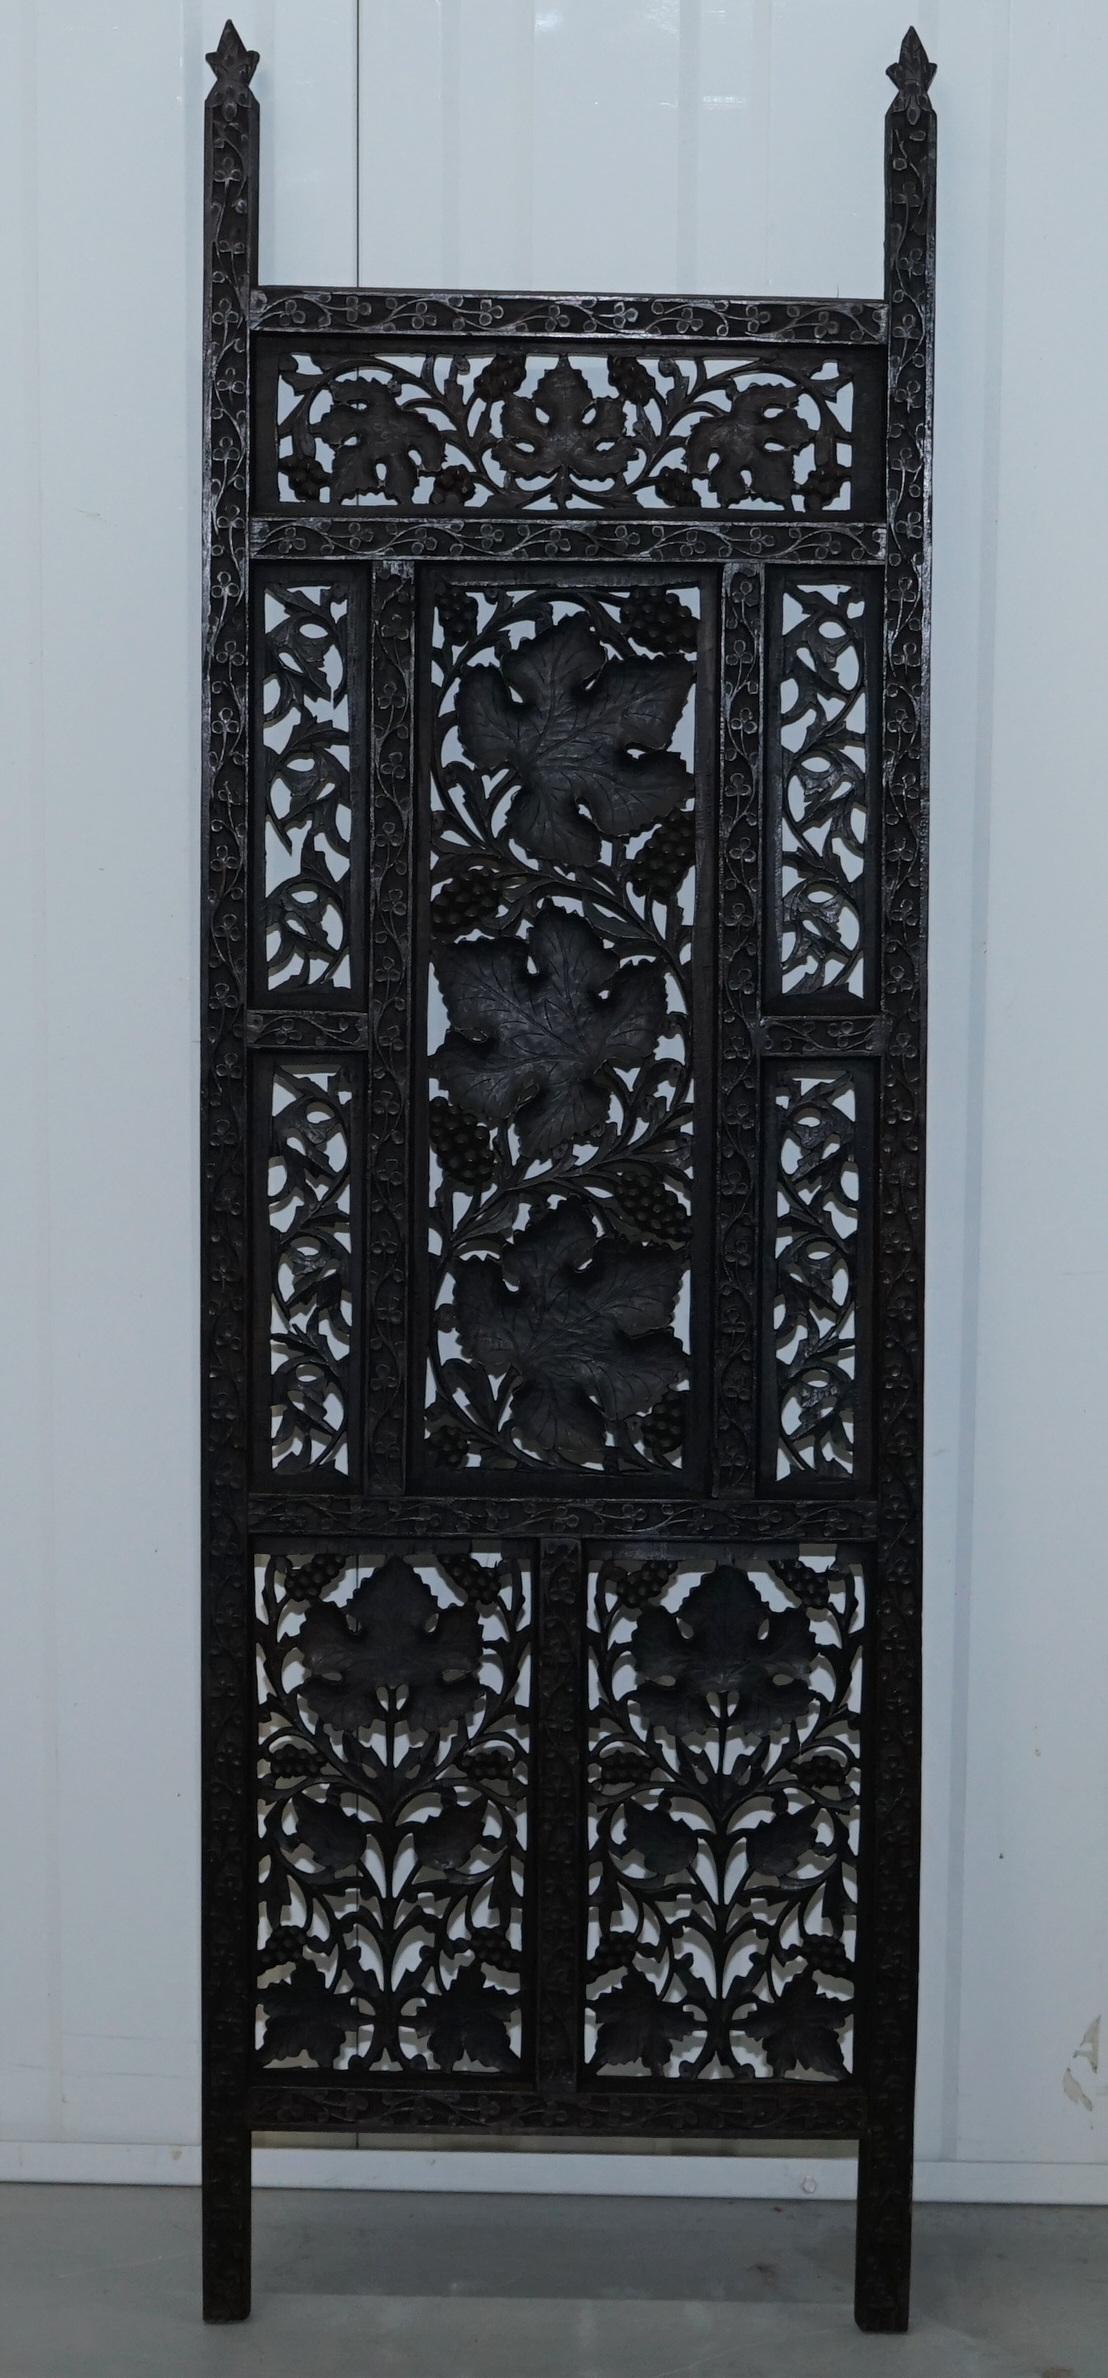 Rare Chinese Fretwork Carved Wall Panels Depicting Leaves Solid Teak Art Wood 2